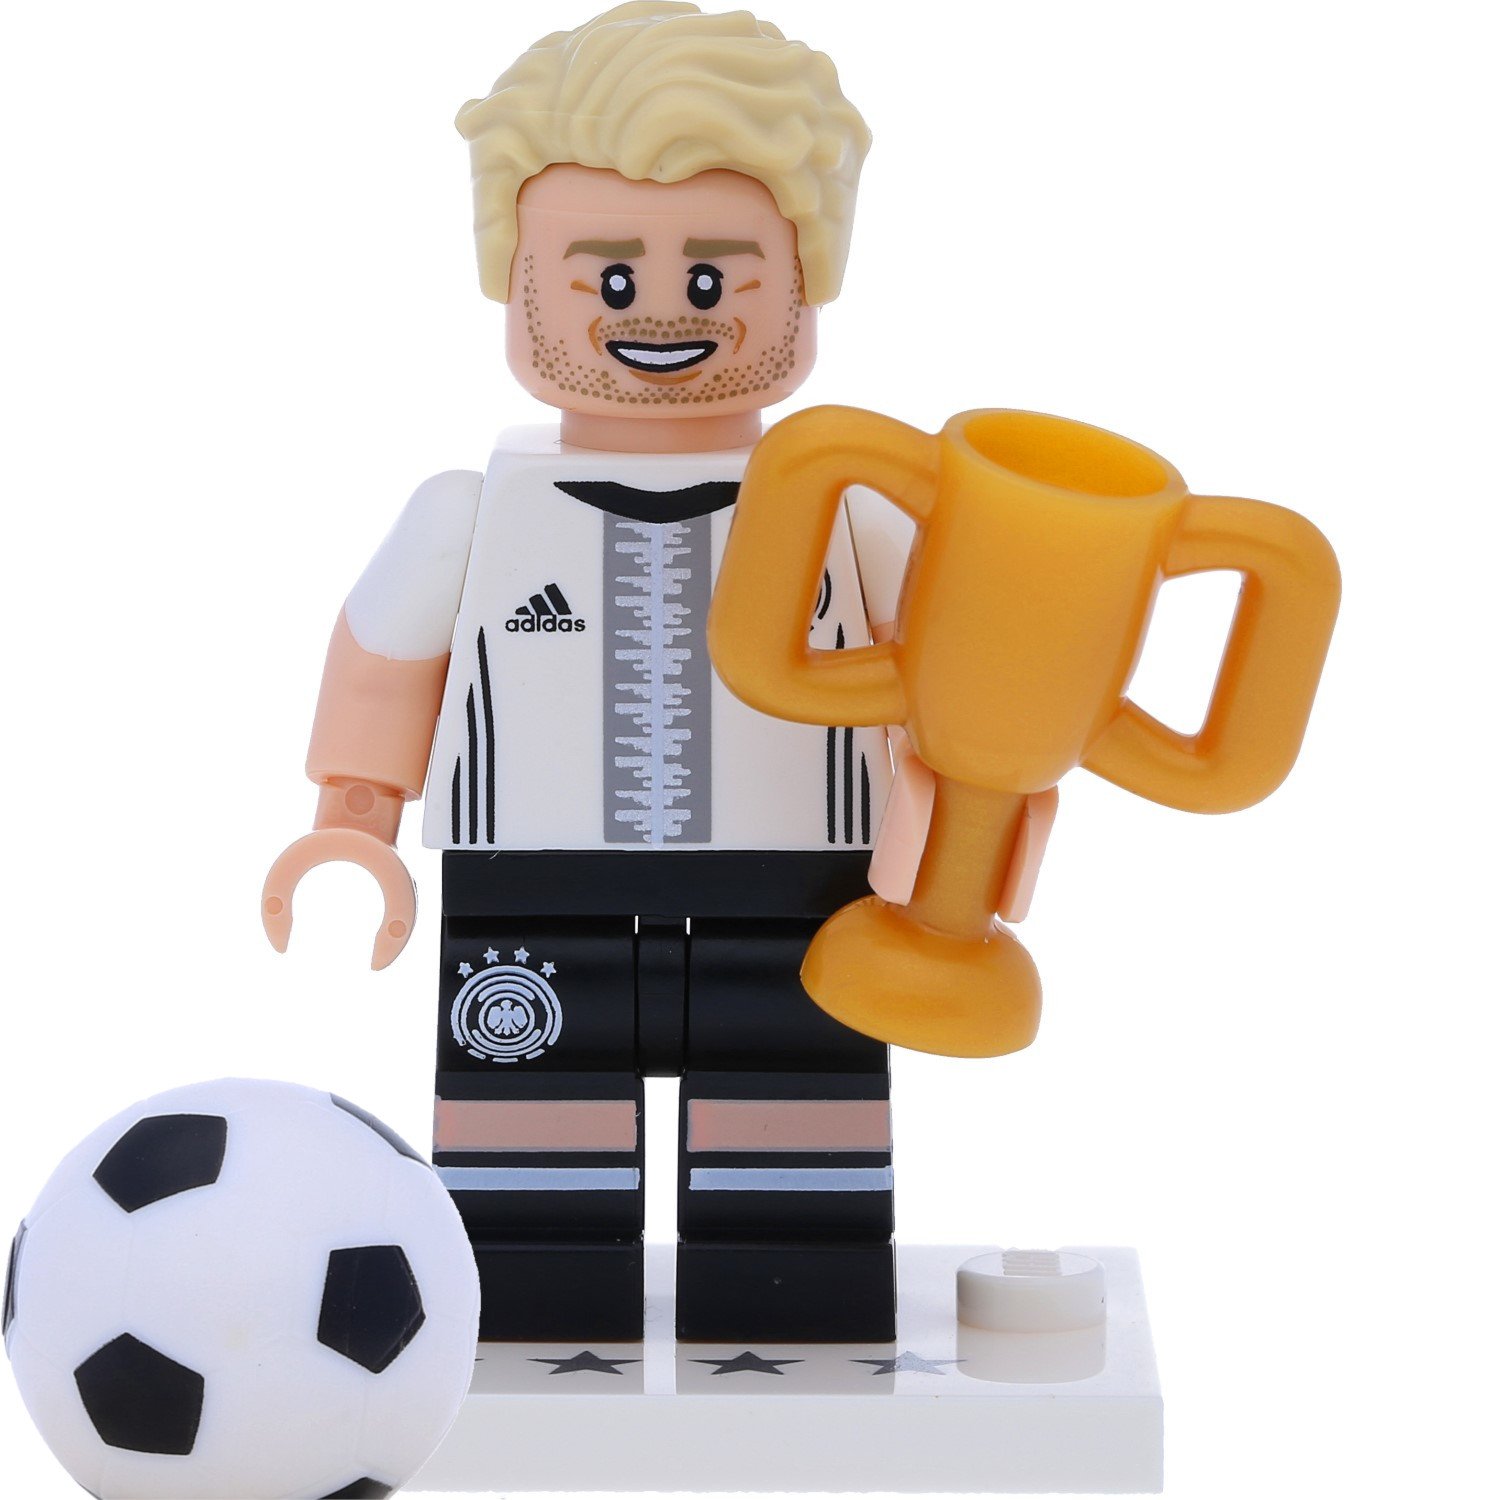 Lego 71014 Minifigure With Germany Team: # 9 Andre Schürrle Trophy